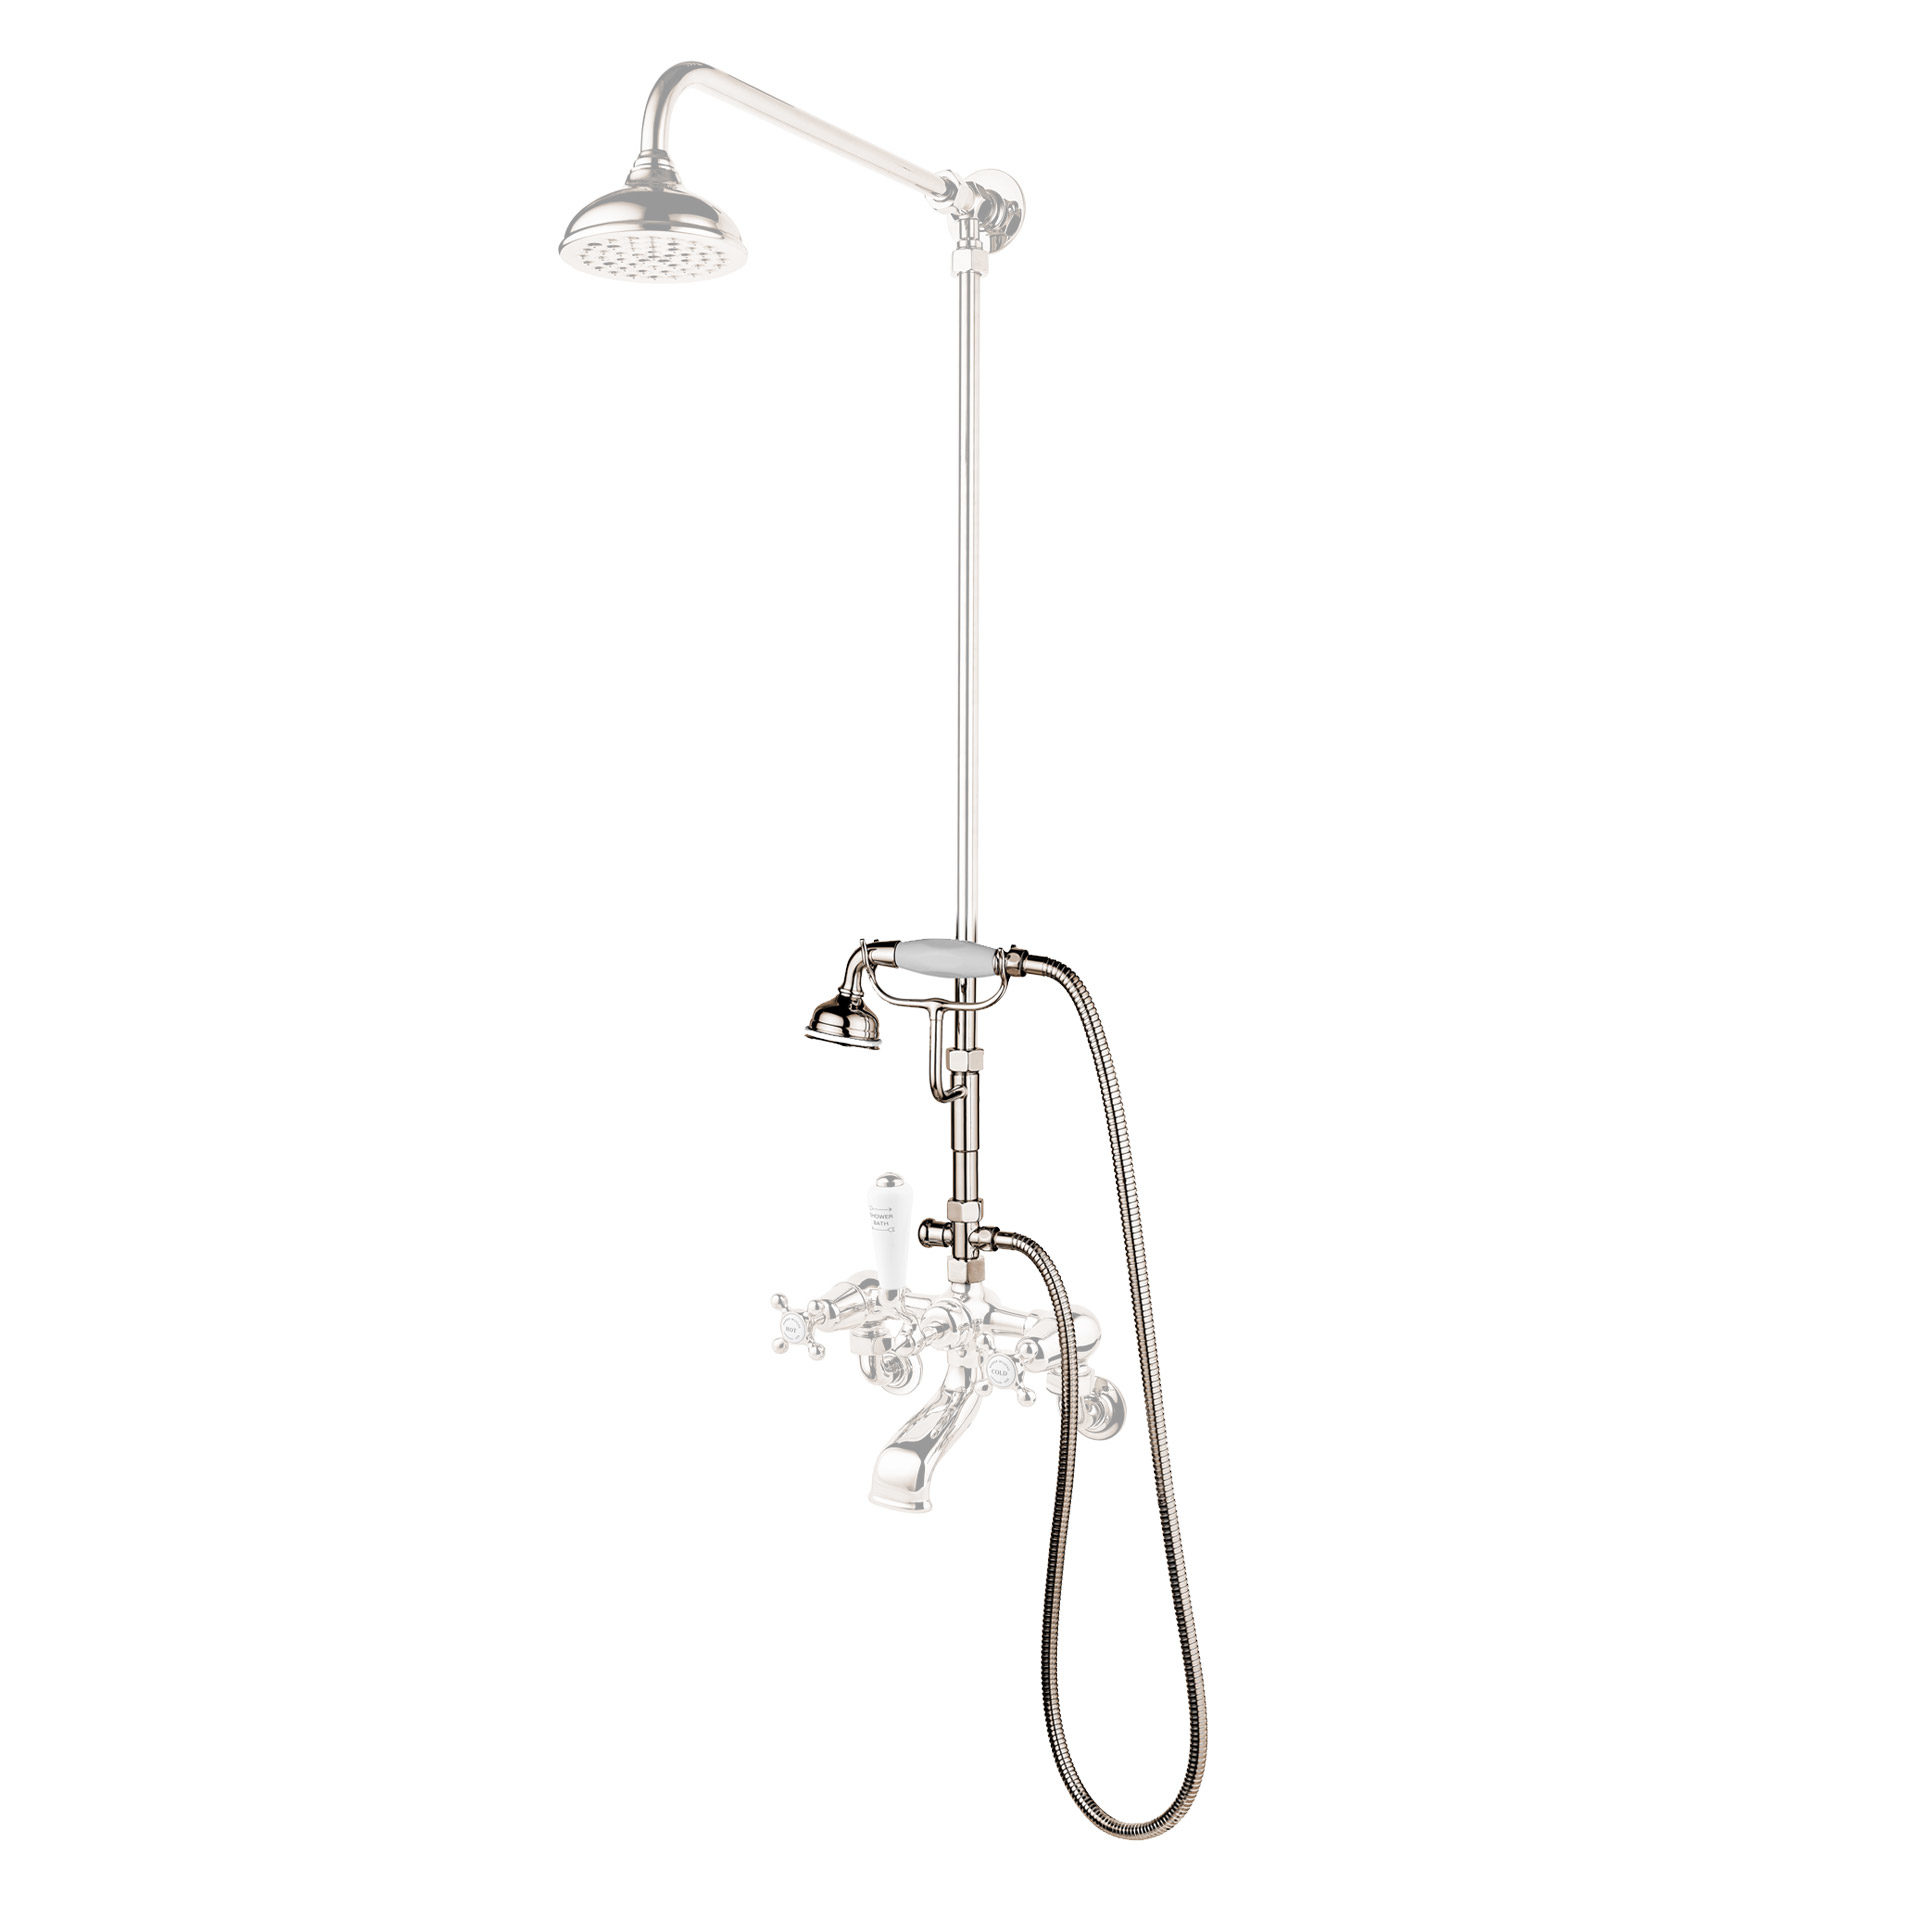 Bespoke shower set up showing optional attachments to either a manual or thermostatic fixed overhead shower